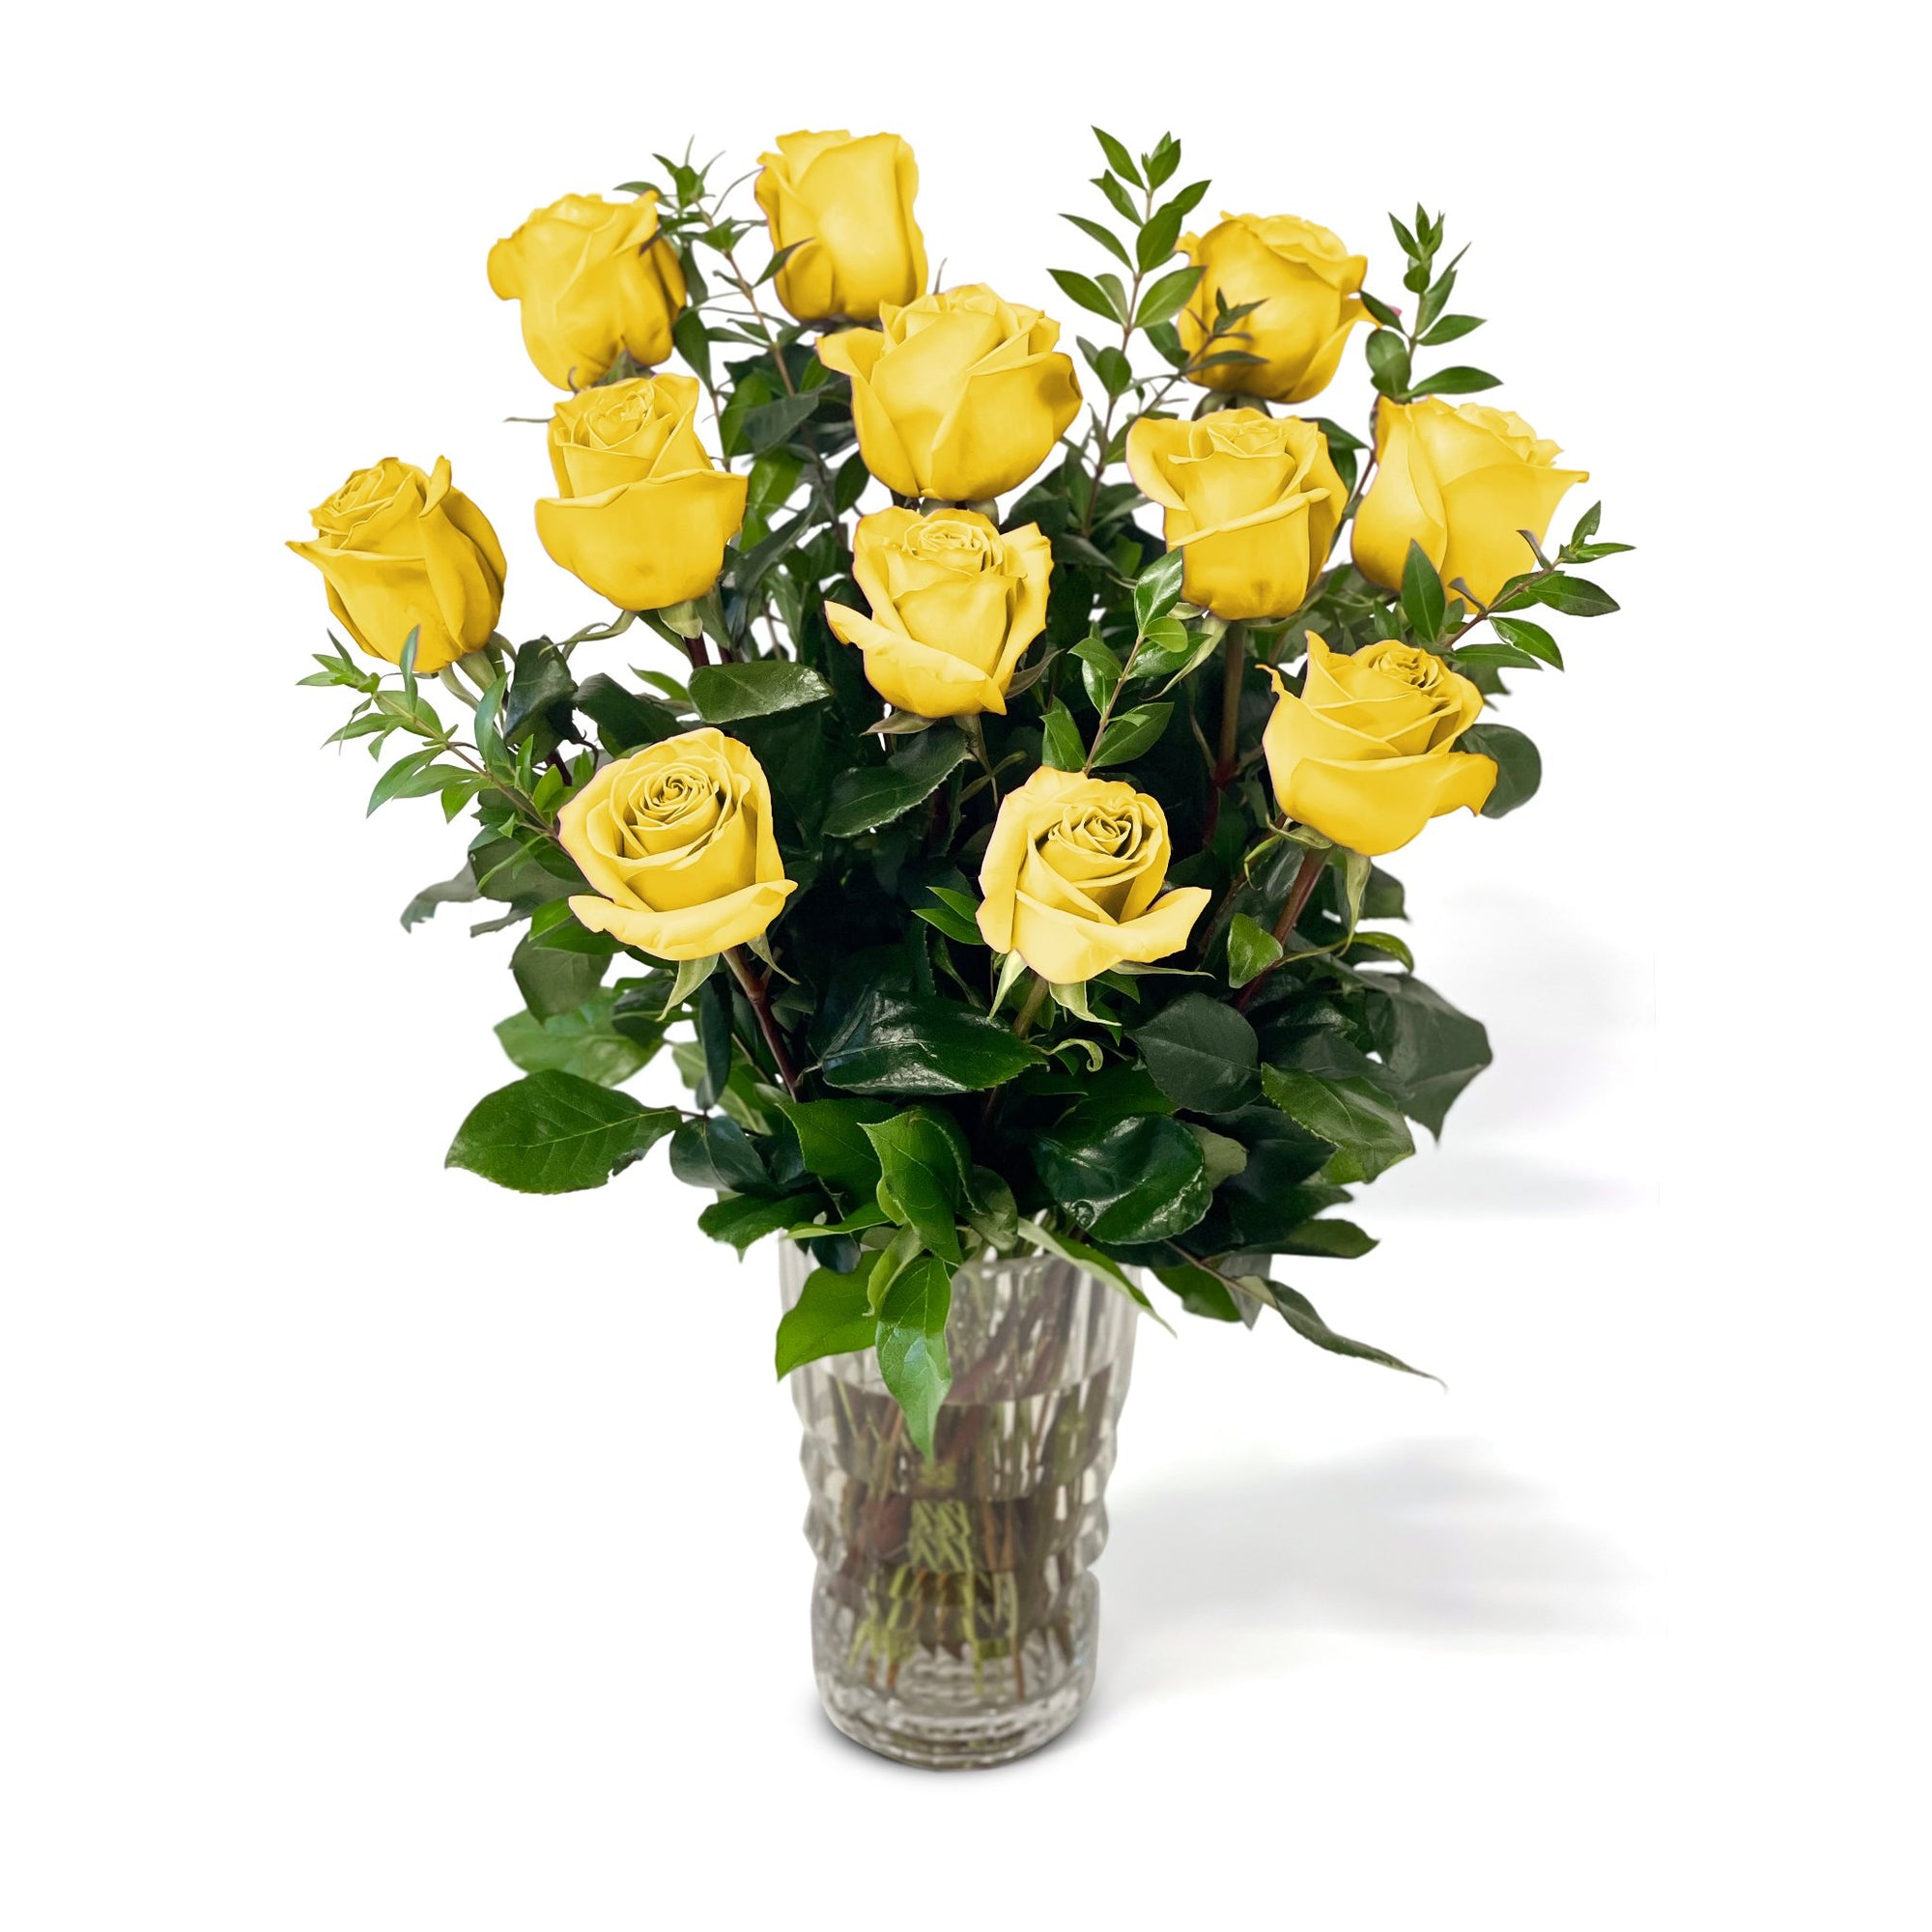 Manhattan Flower Delivery - Fresh Roses in a Crystal Vase | Dozen Yellow - Roses